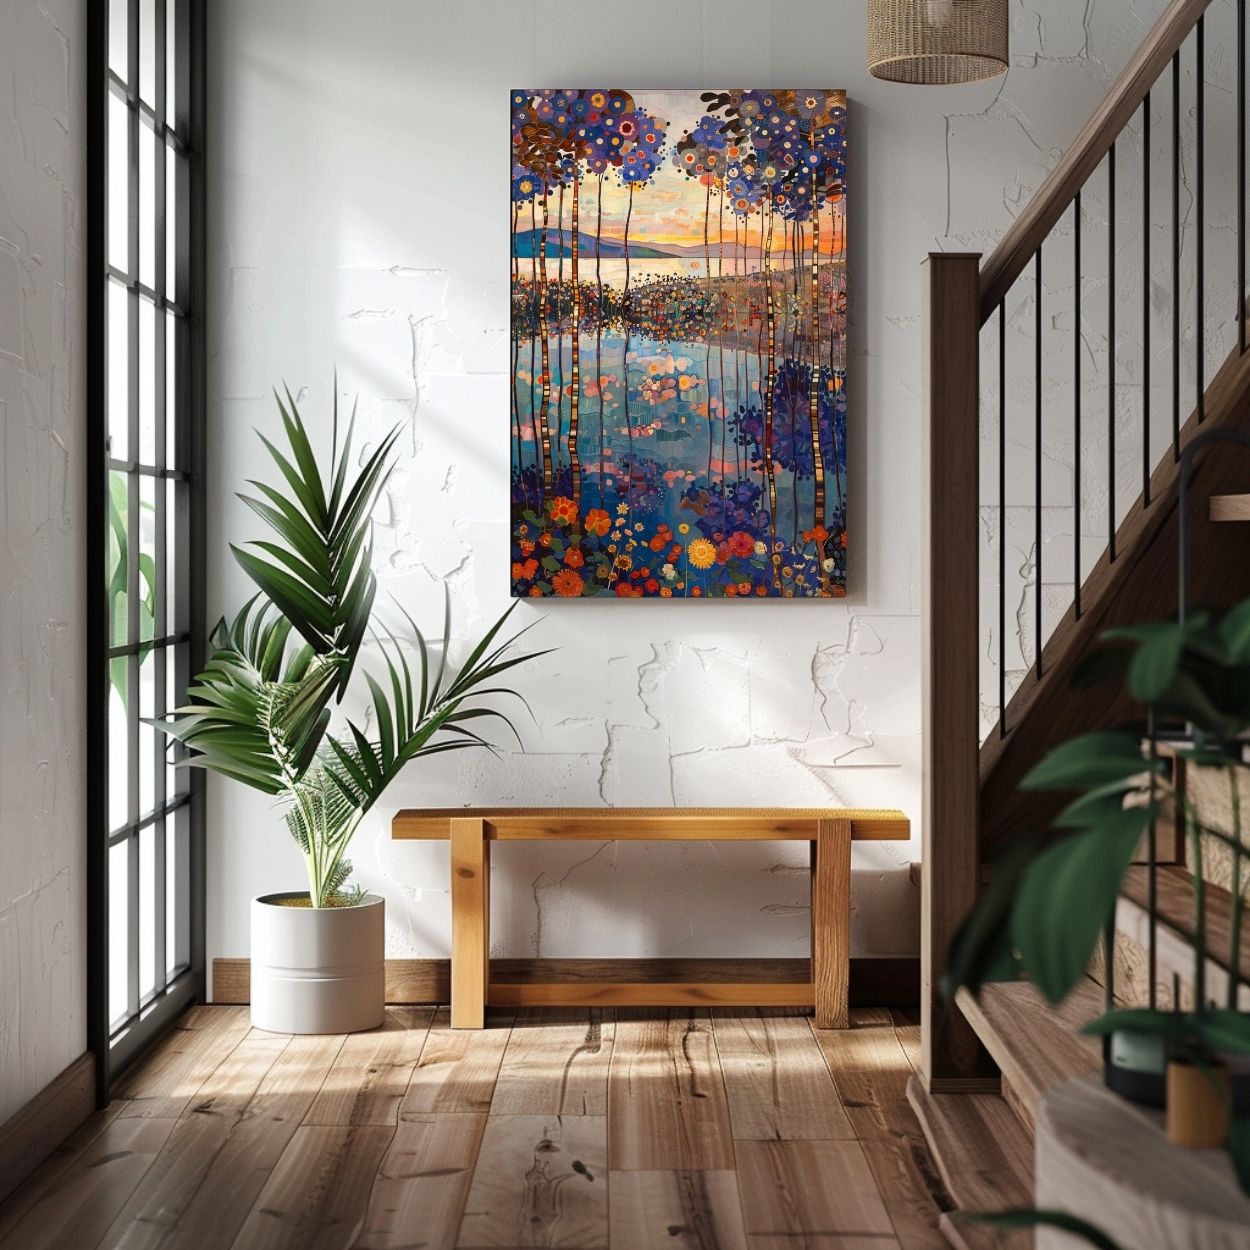 Product image showing canvas wall art of Verdant Echo - Forest and Lake in Intense Colors in a hallway.